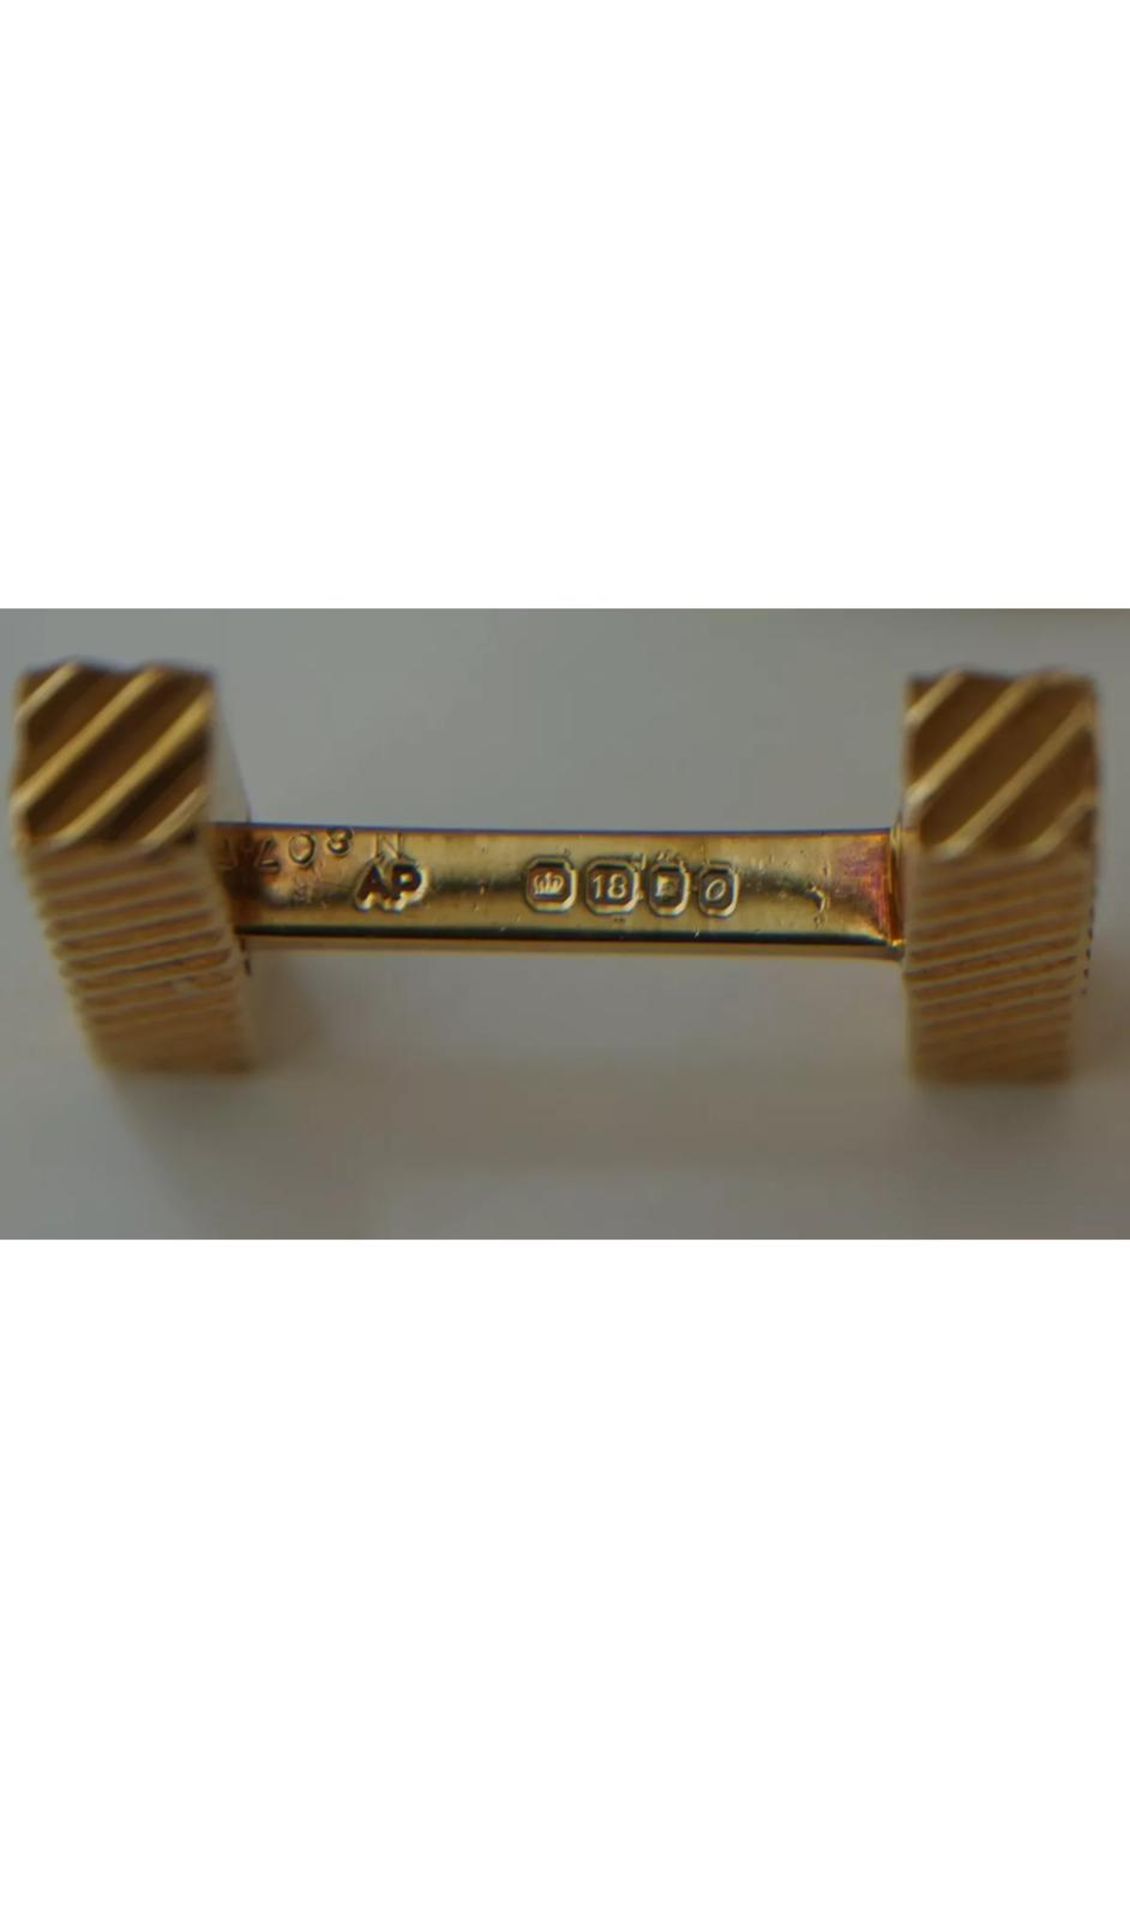 Stunning & Fine Vintage Cartier 18ct Yellow Gold Cuff Links in their Original Cartier Box - Image 5 of 7